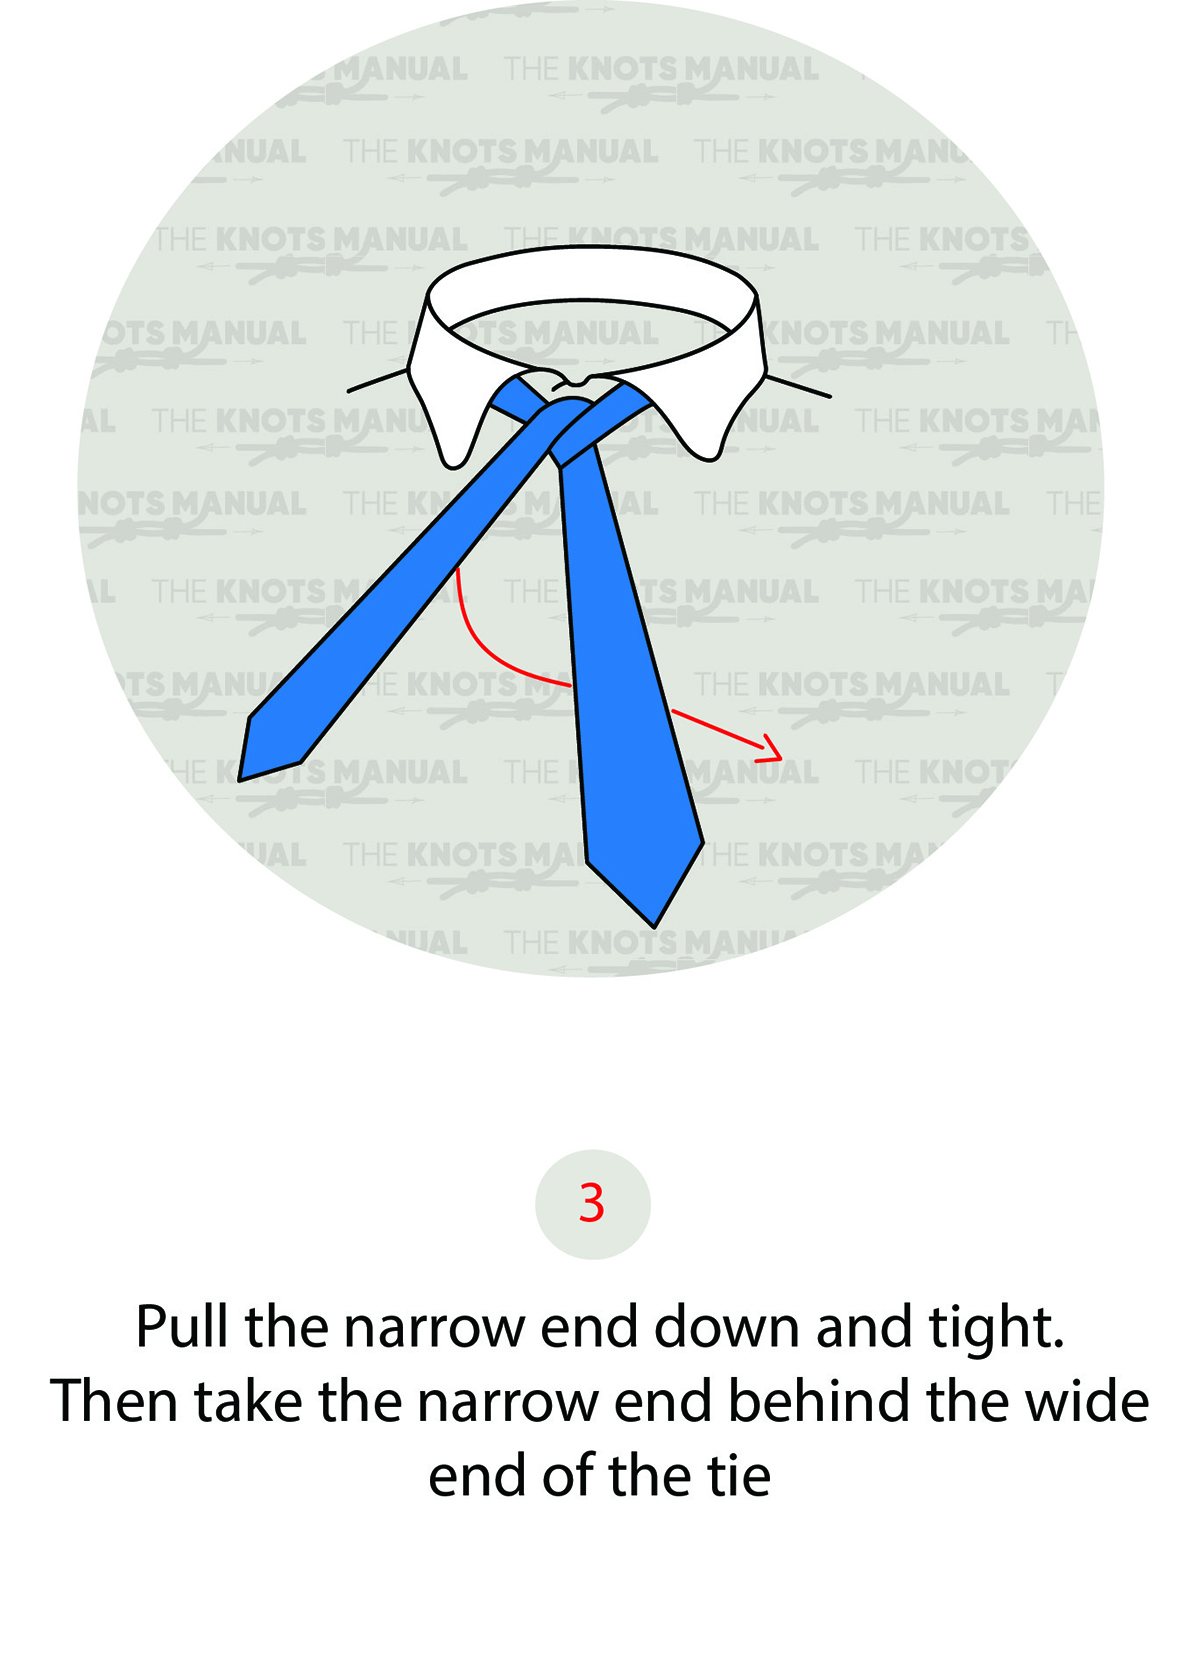 How to Tie the Trinity Tie Knot: Illustrated Guide